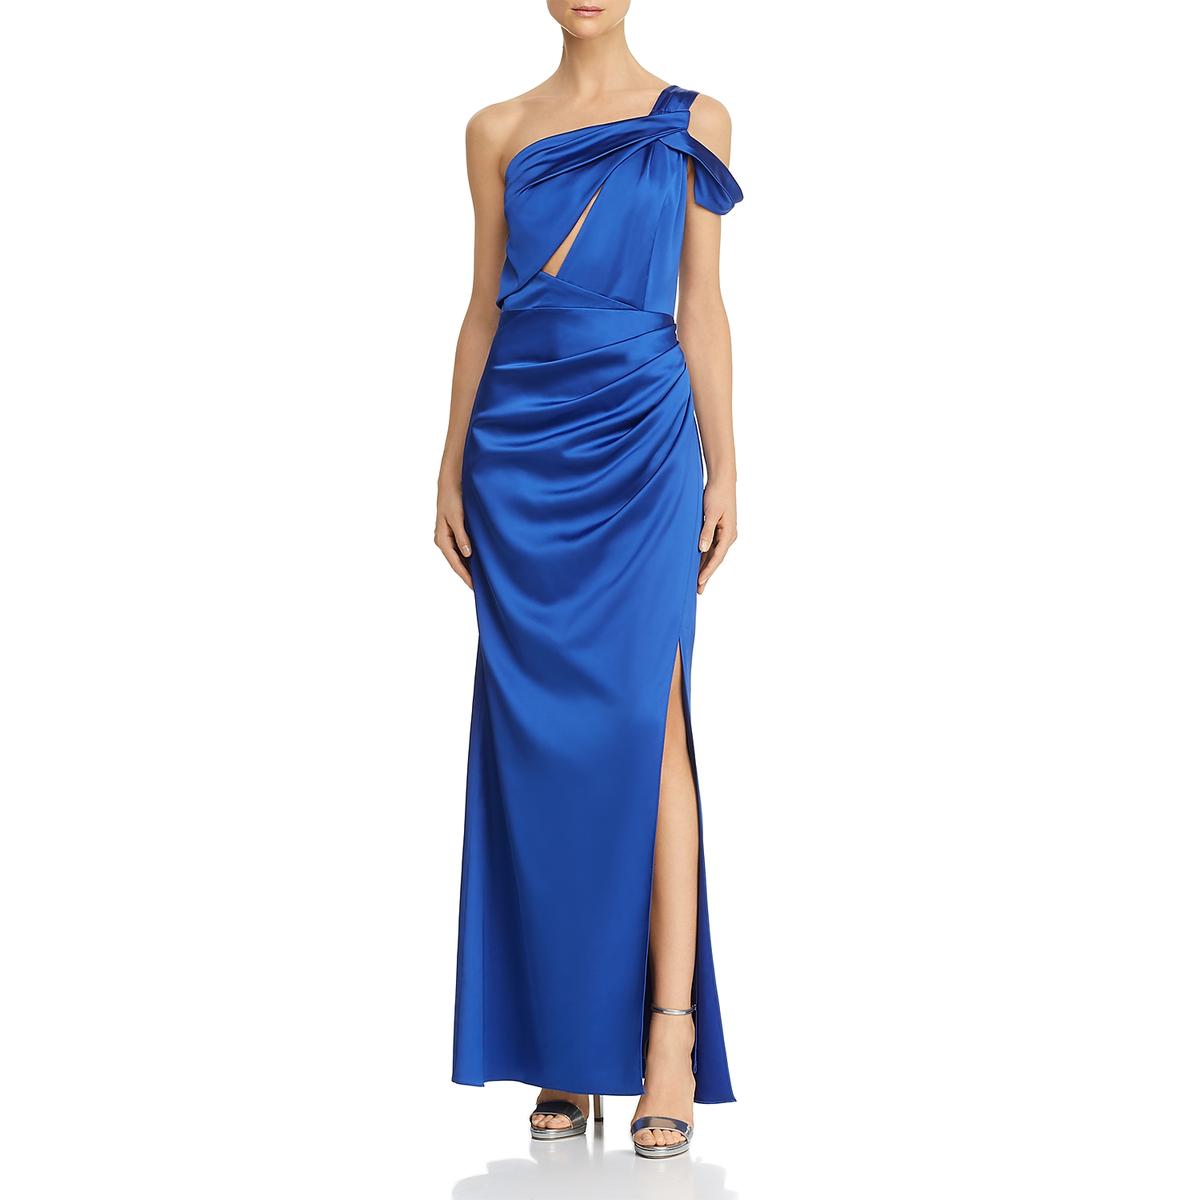 Laundry by Shelli Segal Womens Blue Satin Evening Formal Dress Gown 0 ...